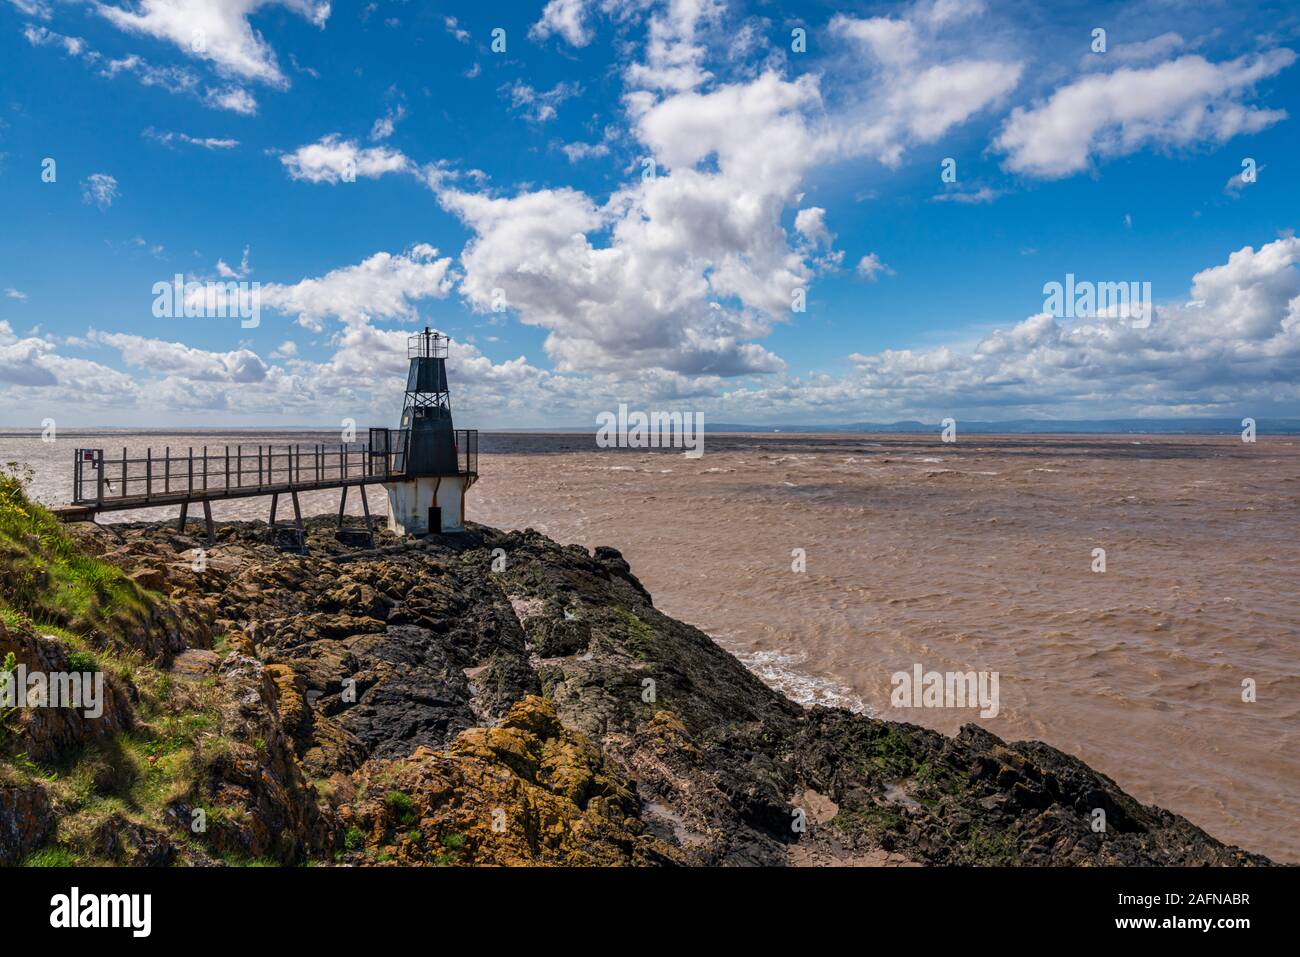 The Portishead Point Lighthouse with the Bristol Channel in the background, seen in Portishead, North Somerset, England, UK Stock Photo